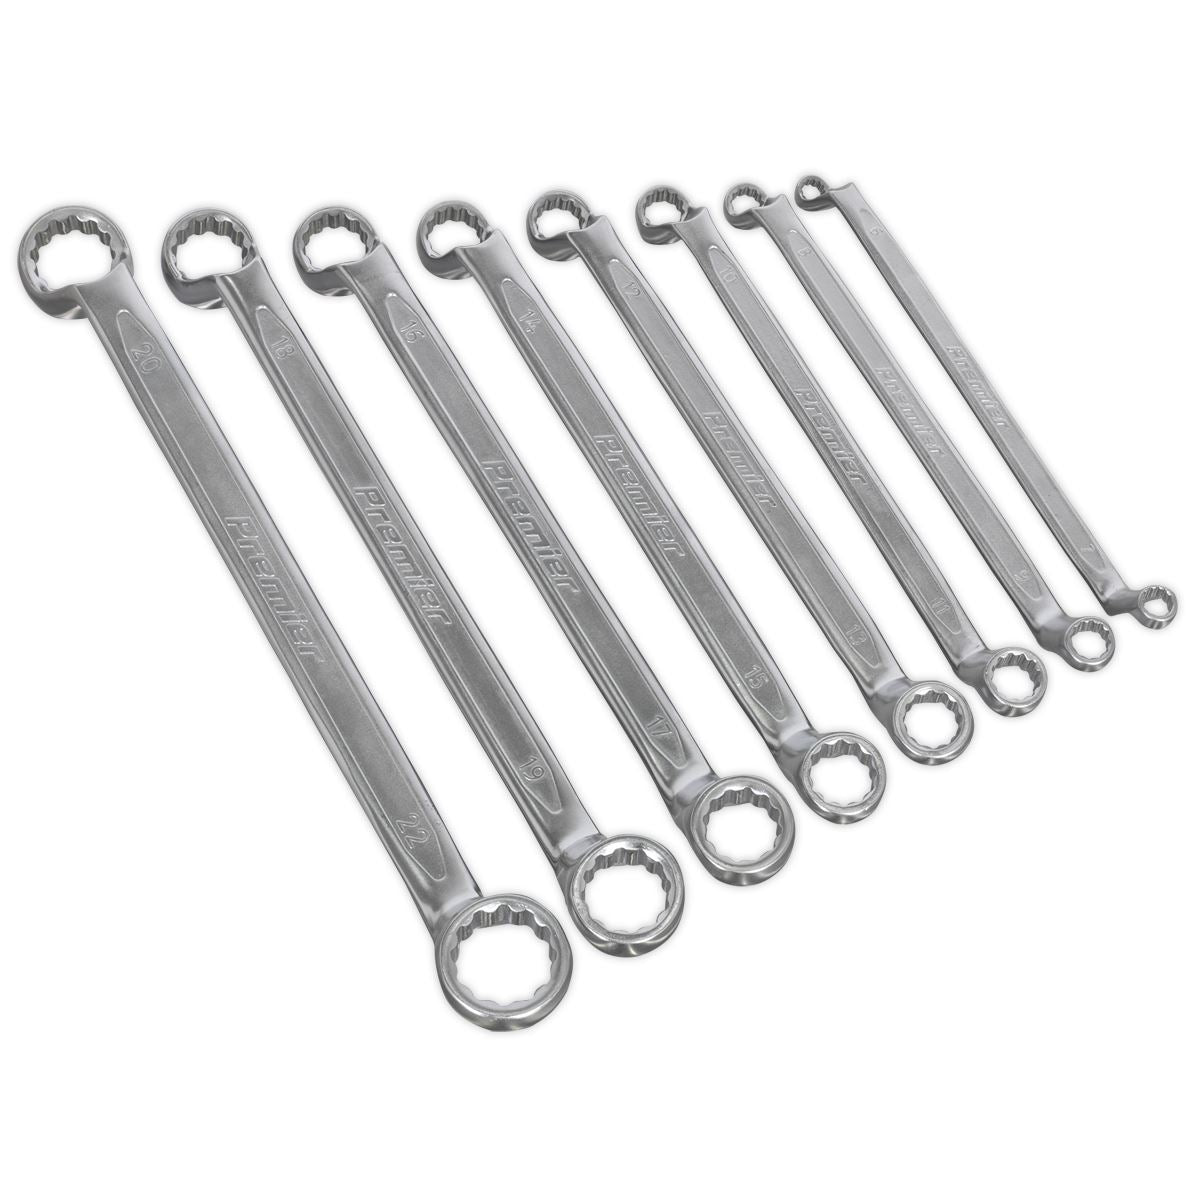 Sealey Premier 8 Piece Cold Stamped Offset Double End Ring Spanner Set Metric